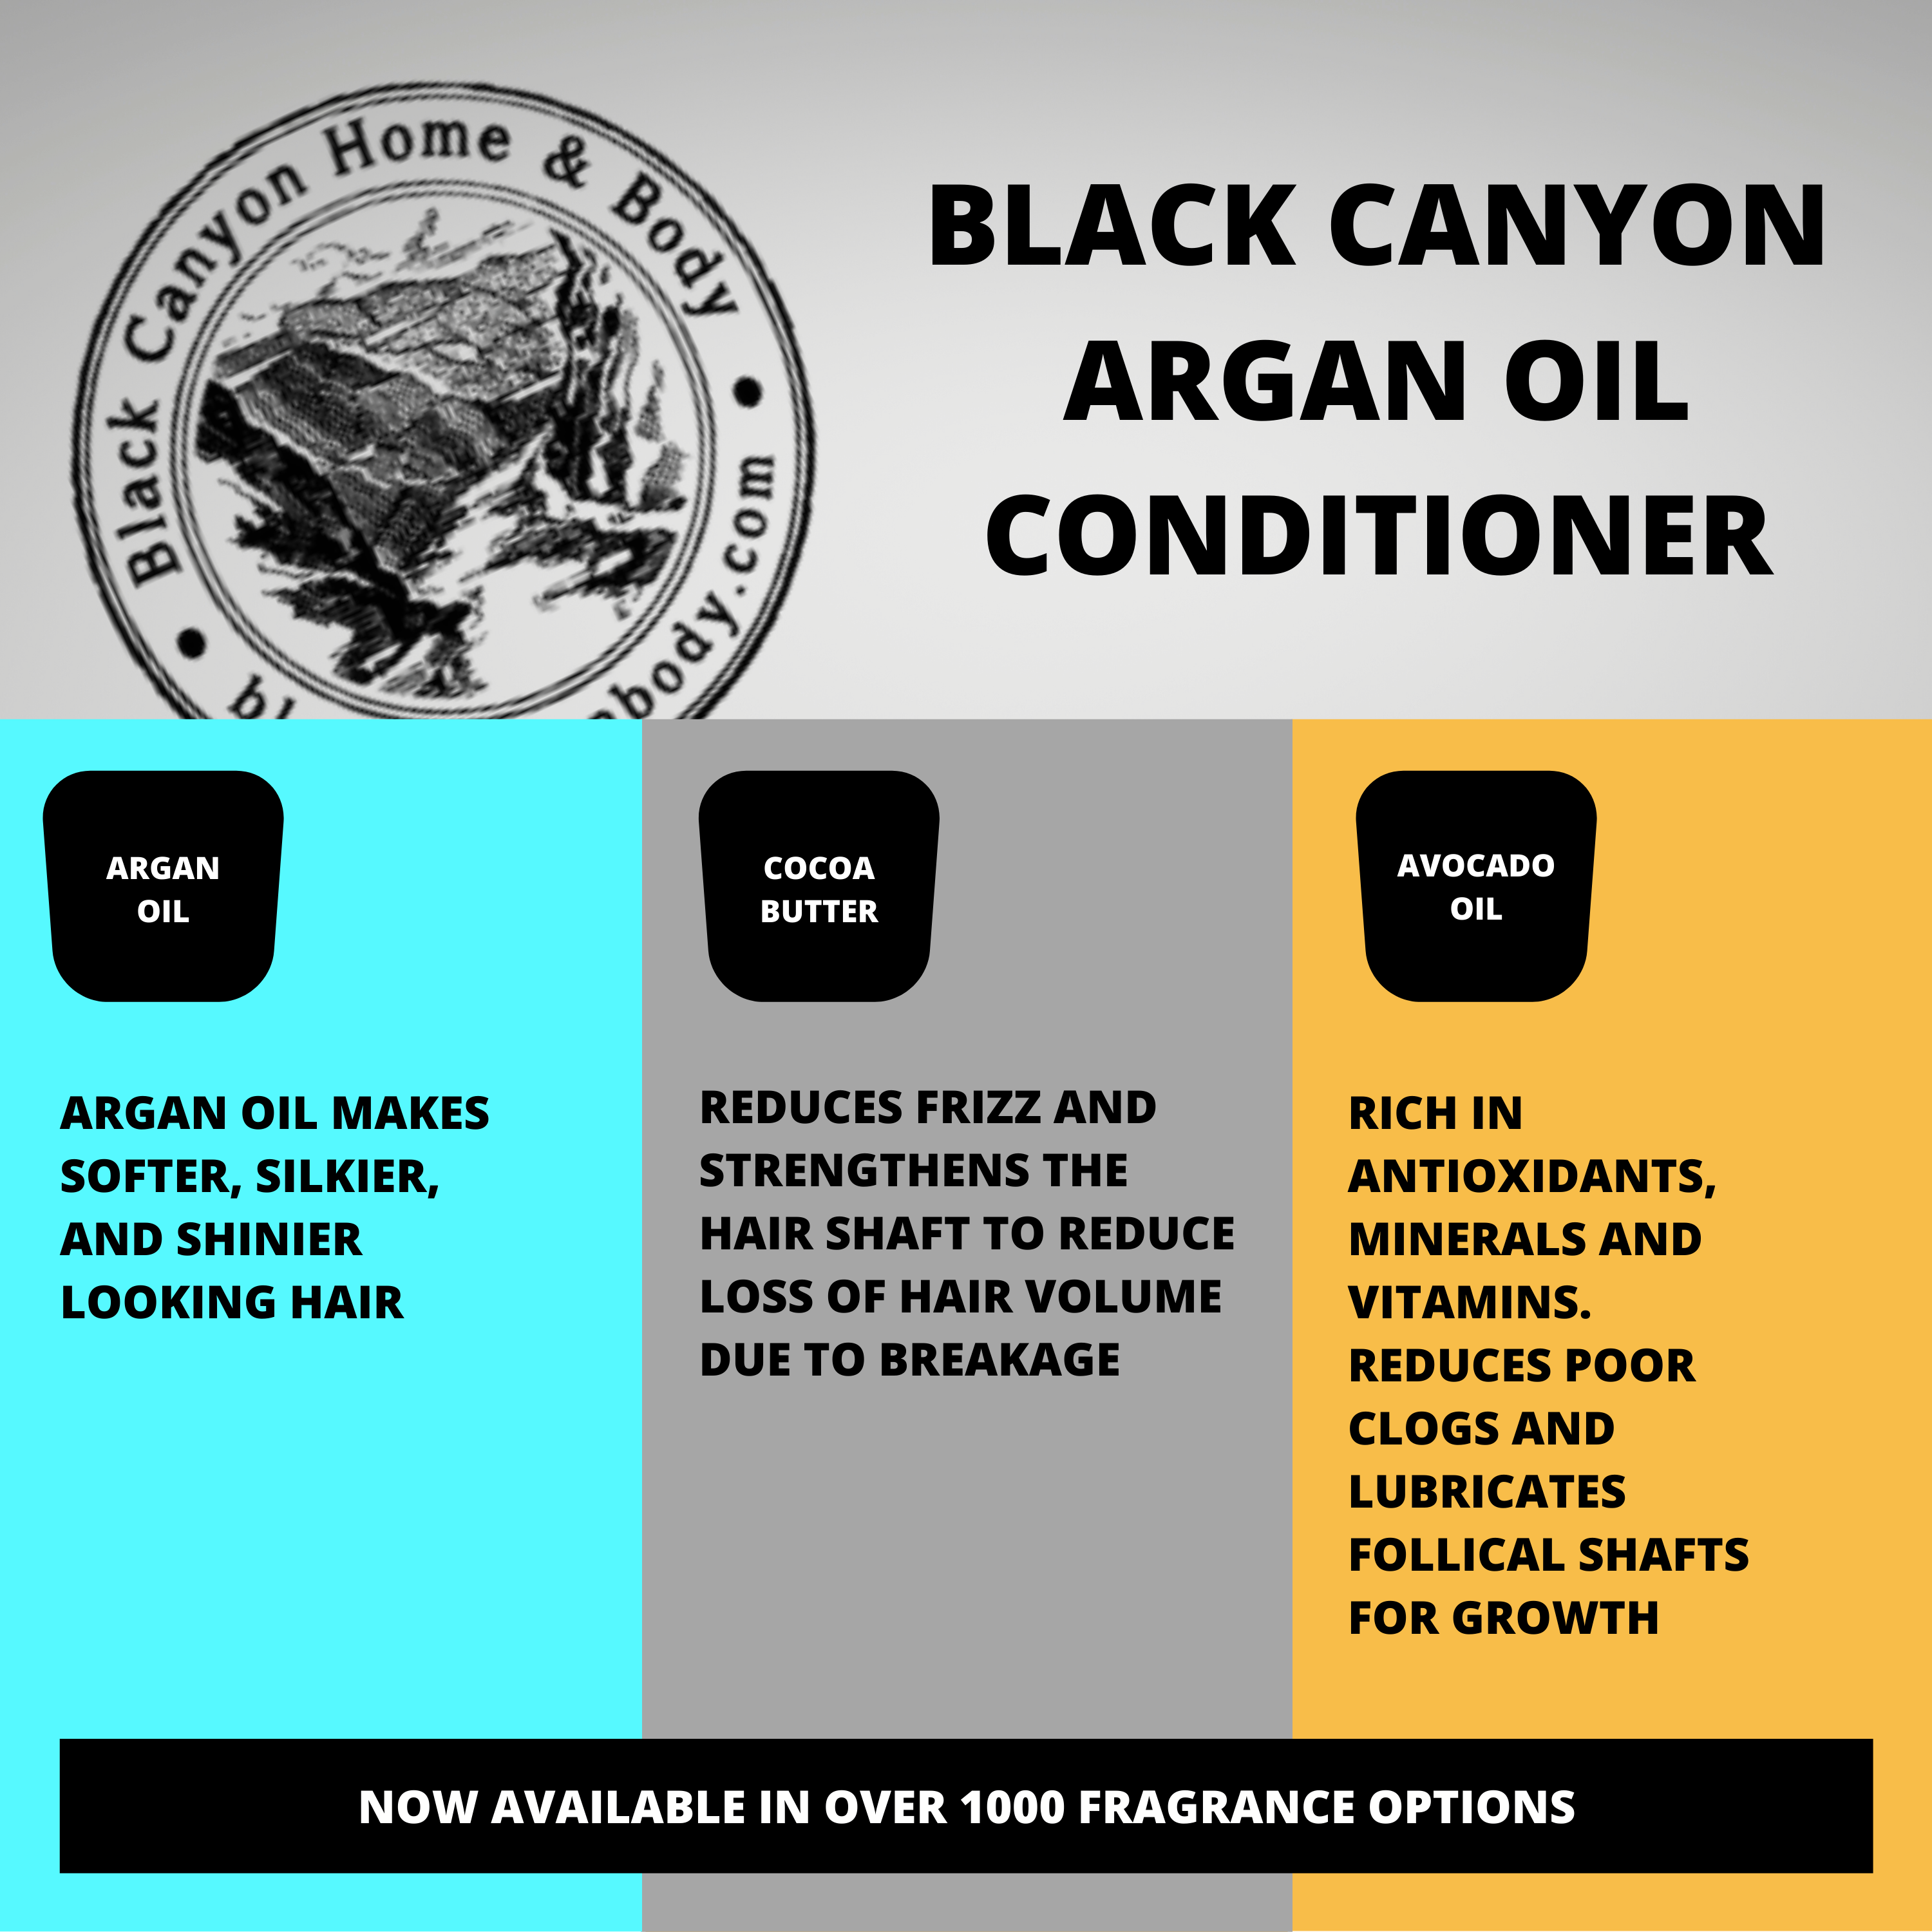 Black Canyon Frangipani Scented Conditioner with Argan Oil